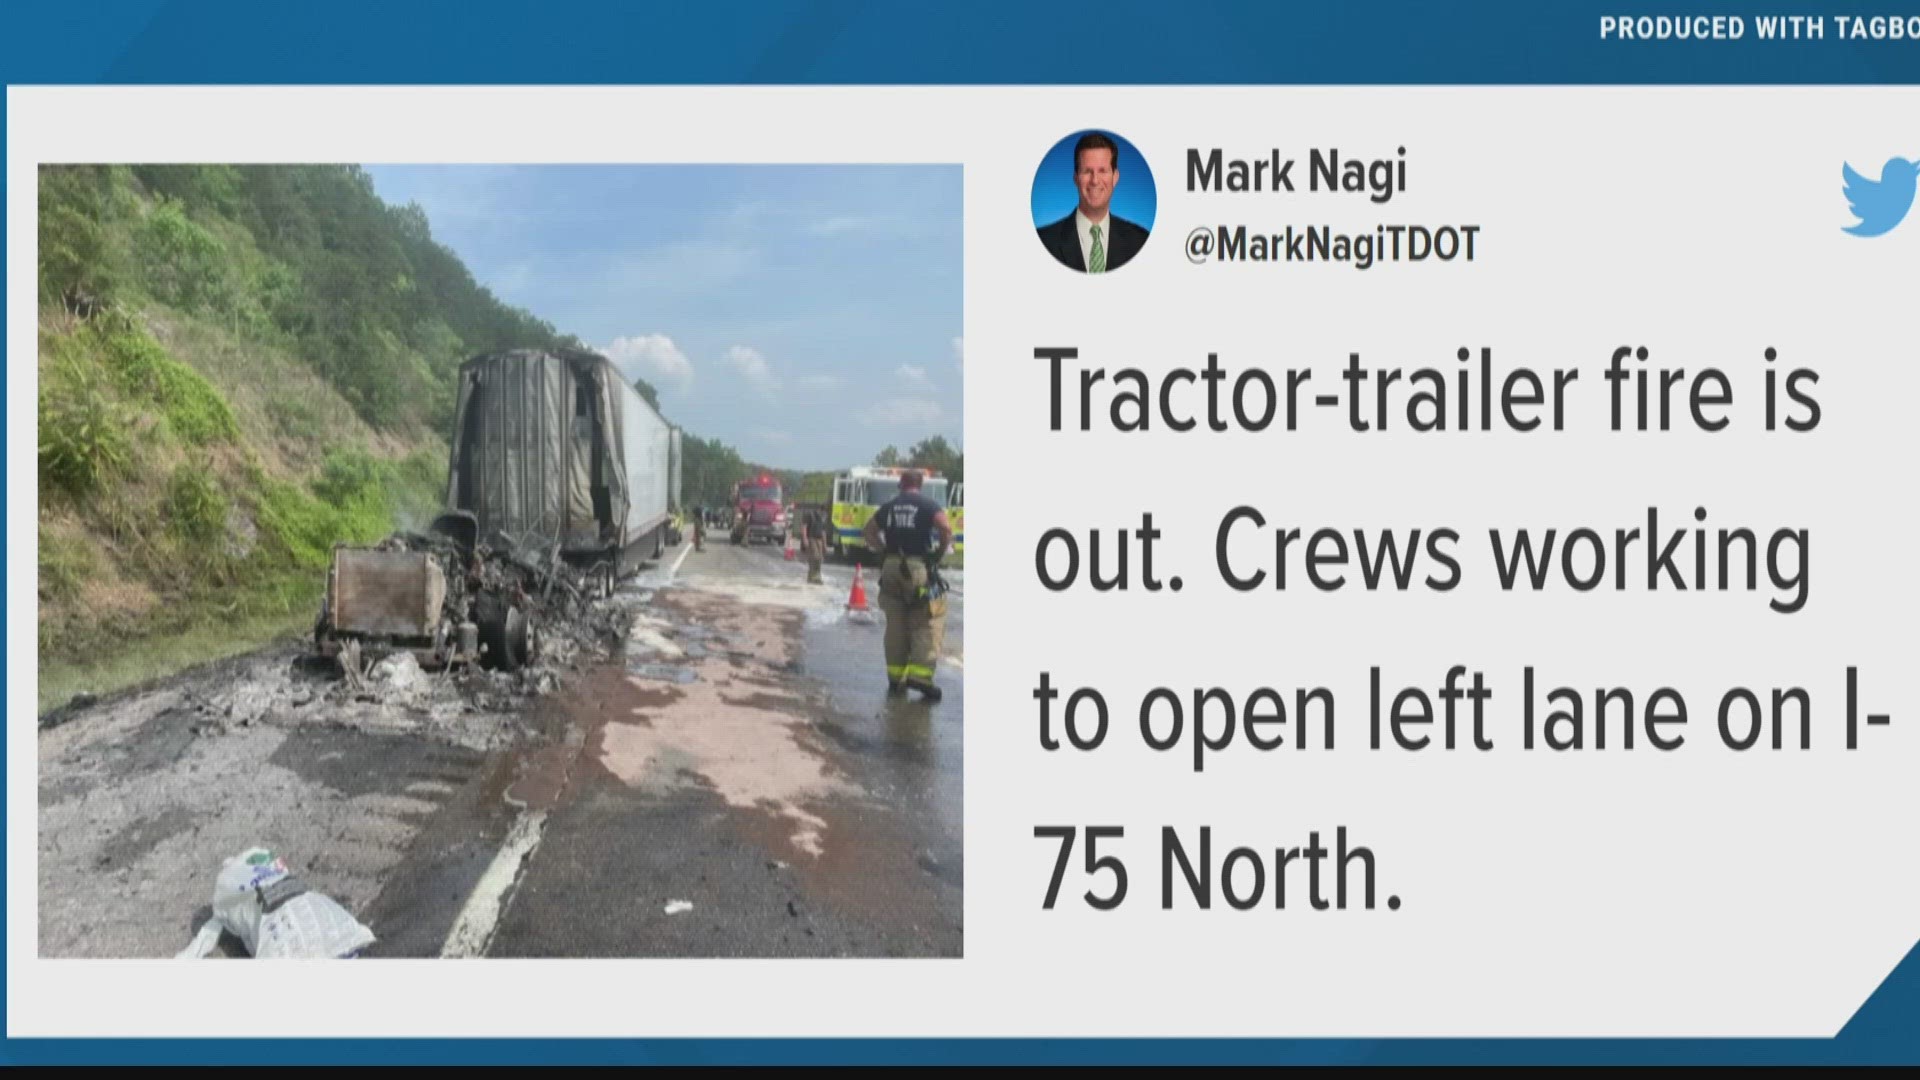 The vehicle fire was reported to TDOT at around 4:09 p.m. Eastern time. According to images from officials, a tractor-trailer had caught fire.